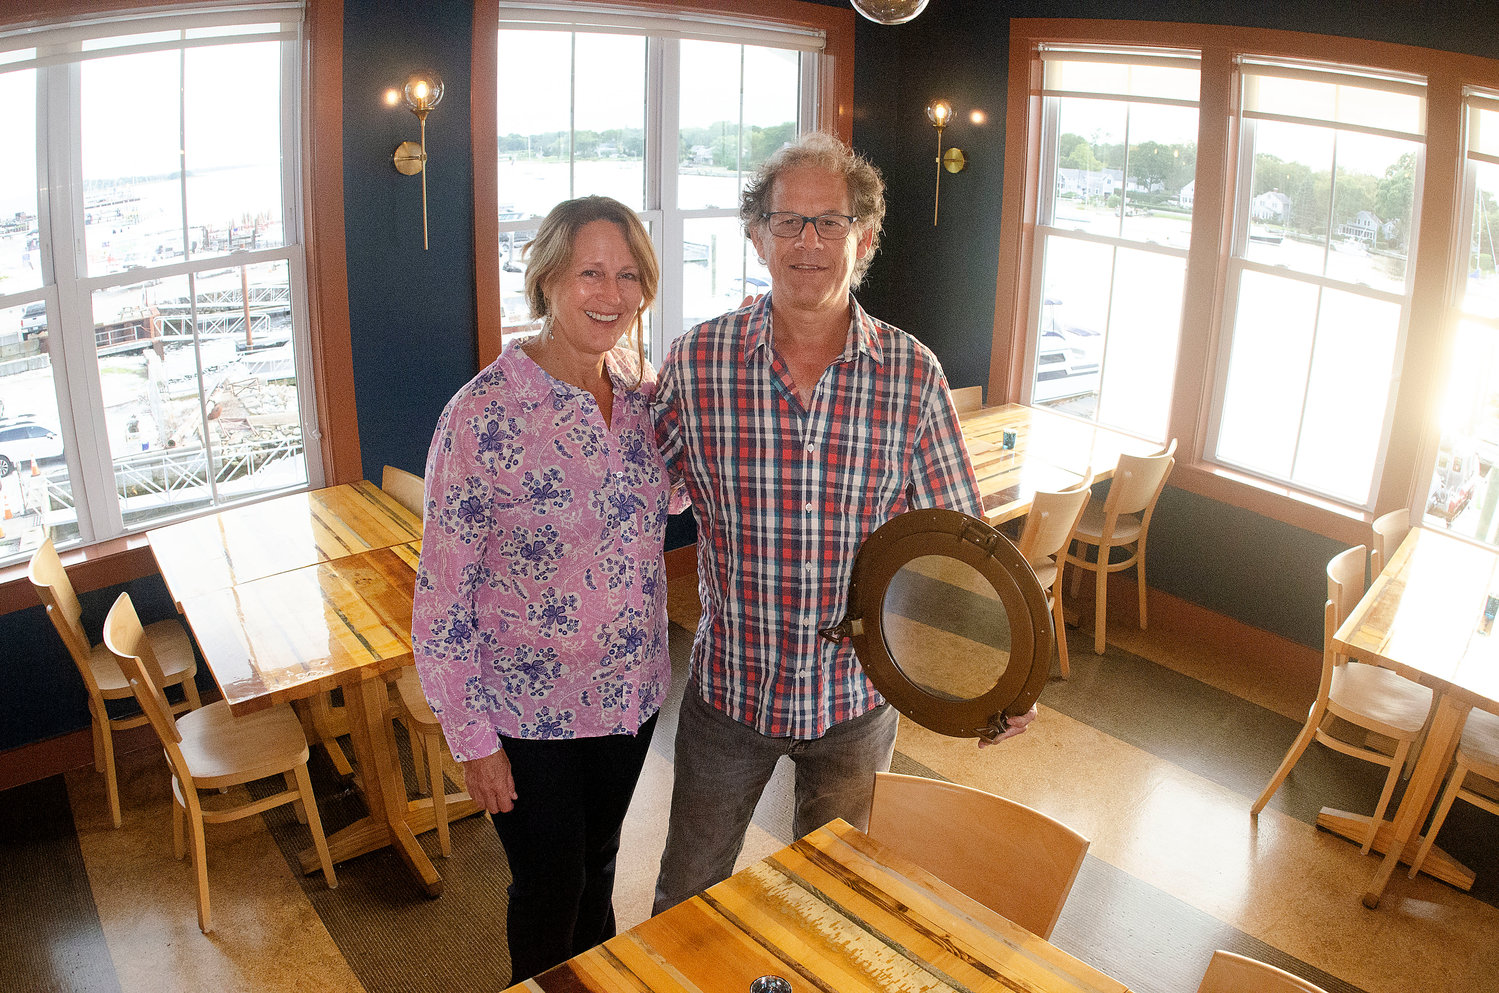 Russell Goyette, owner of Trafford Restaurant (285 Water Street), and his fiancèe, Sherri Miles, inside the newly-renovated restaurant overlooking the river.